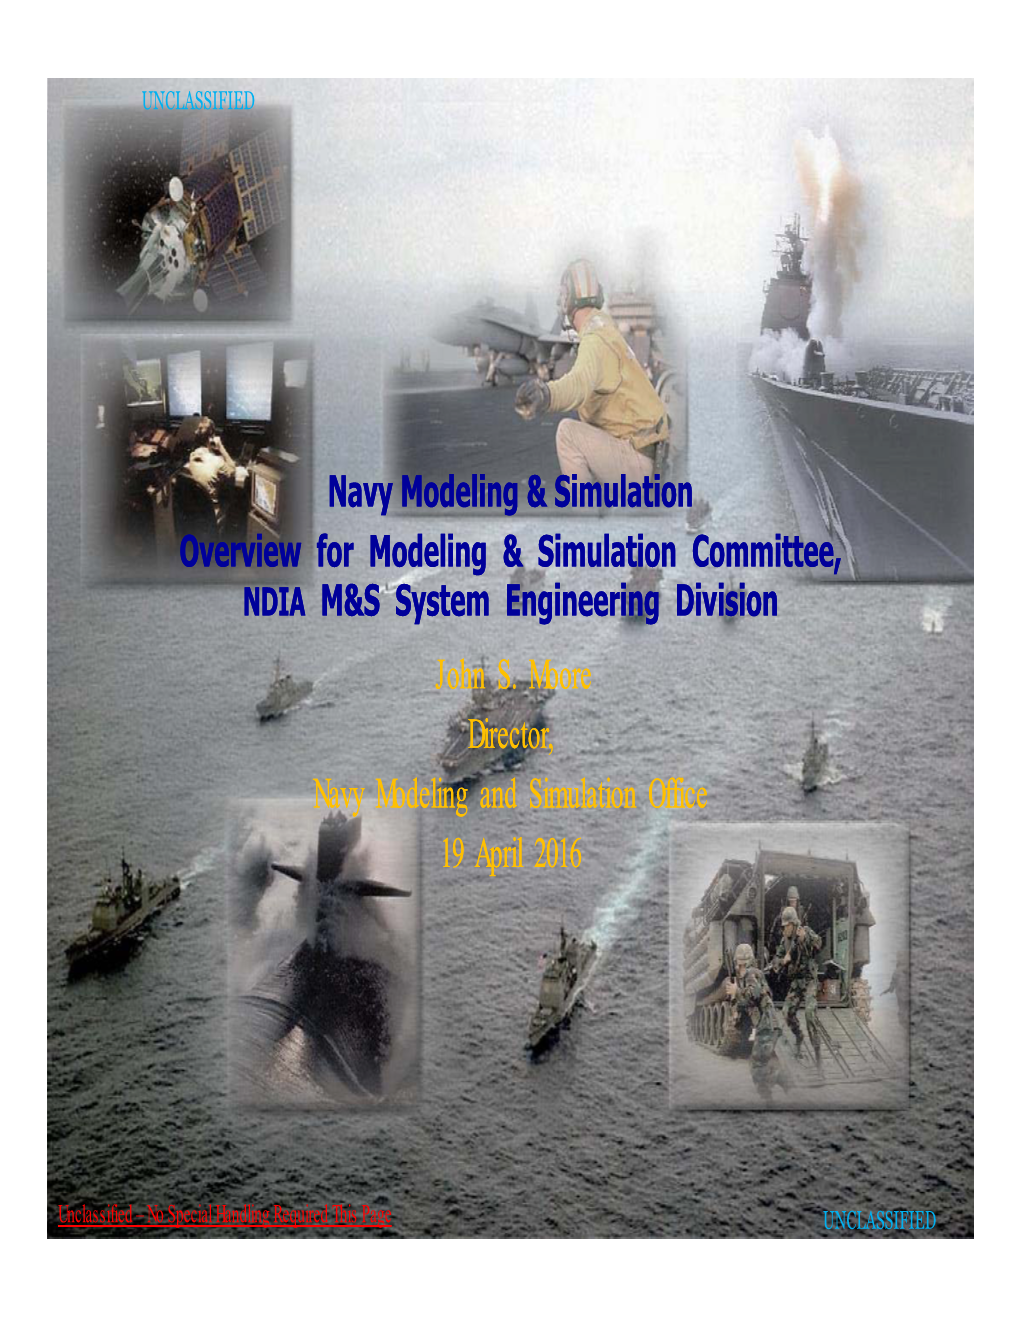 Navy Modeling & Simulation Overview for Modeling & Simulation